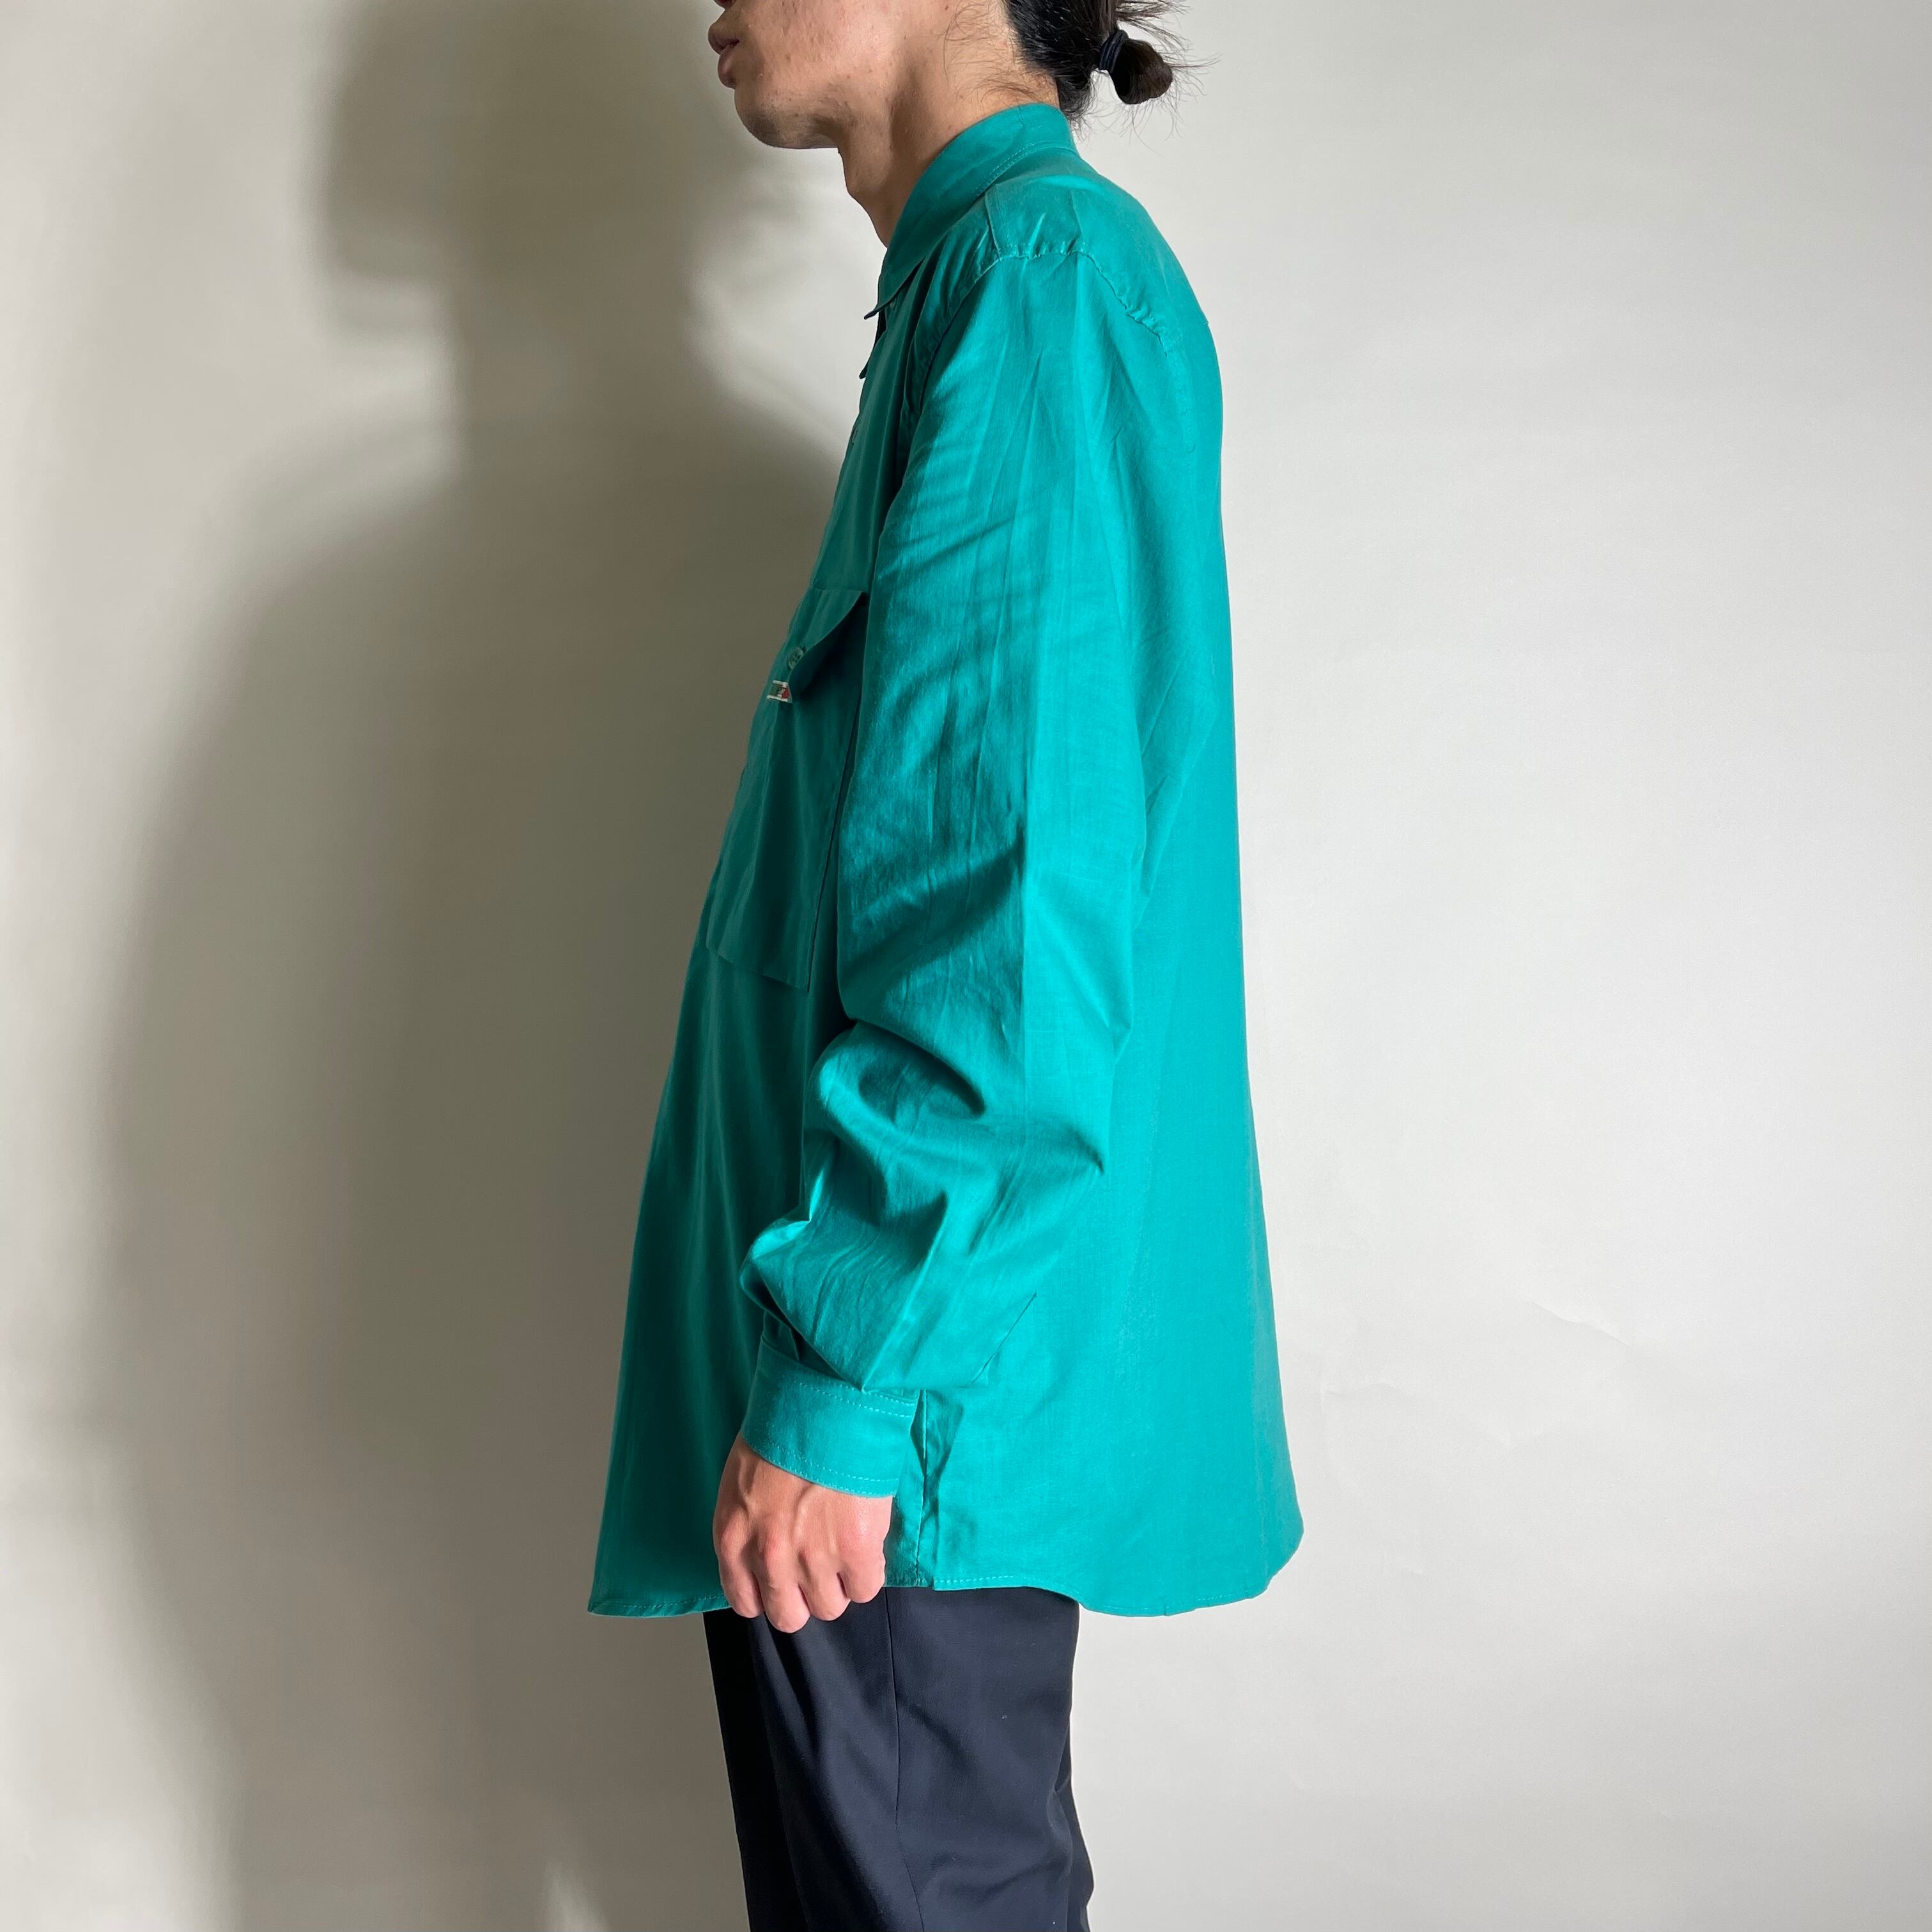 made in italy green color  shirt